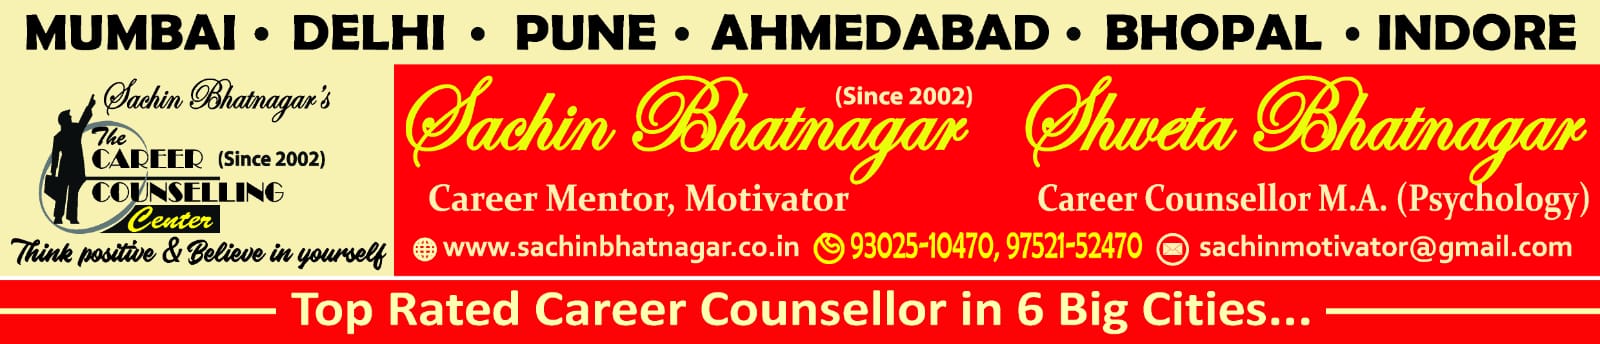 Sachin Bhatnagar's The Career Counselling Centre (Top Rated Since 2002)